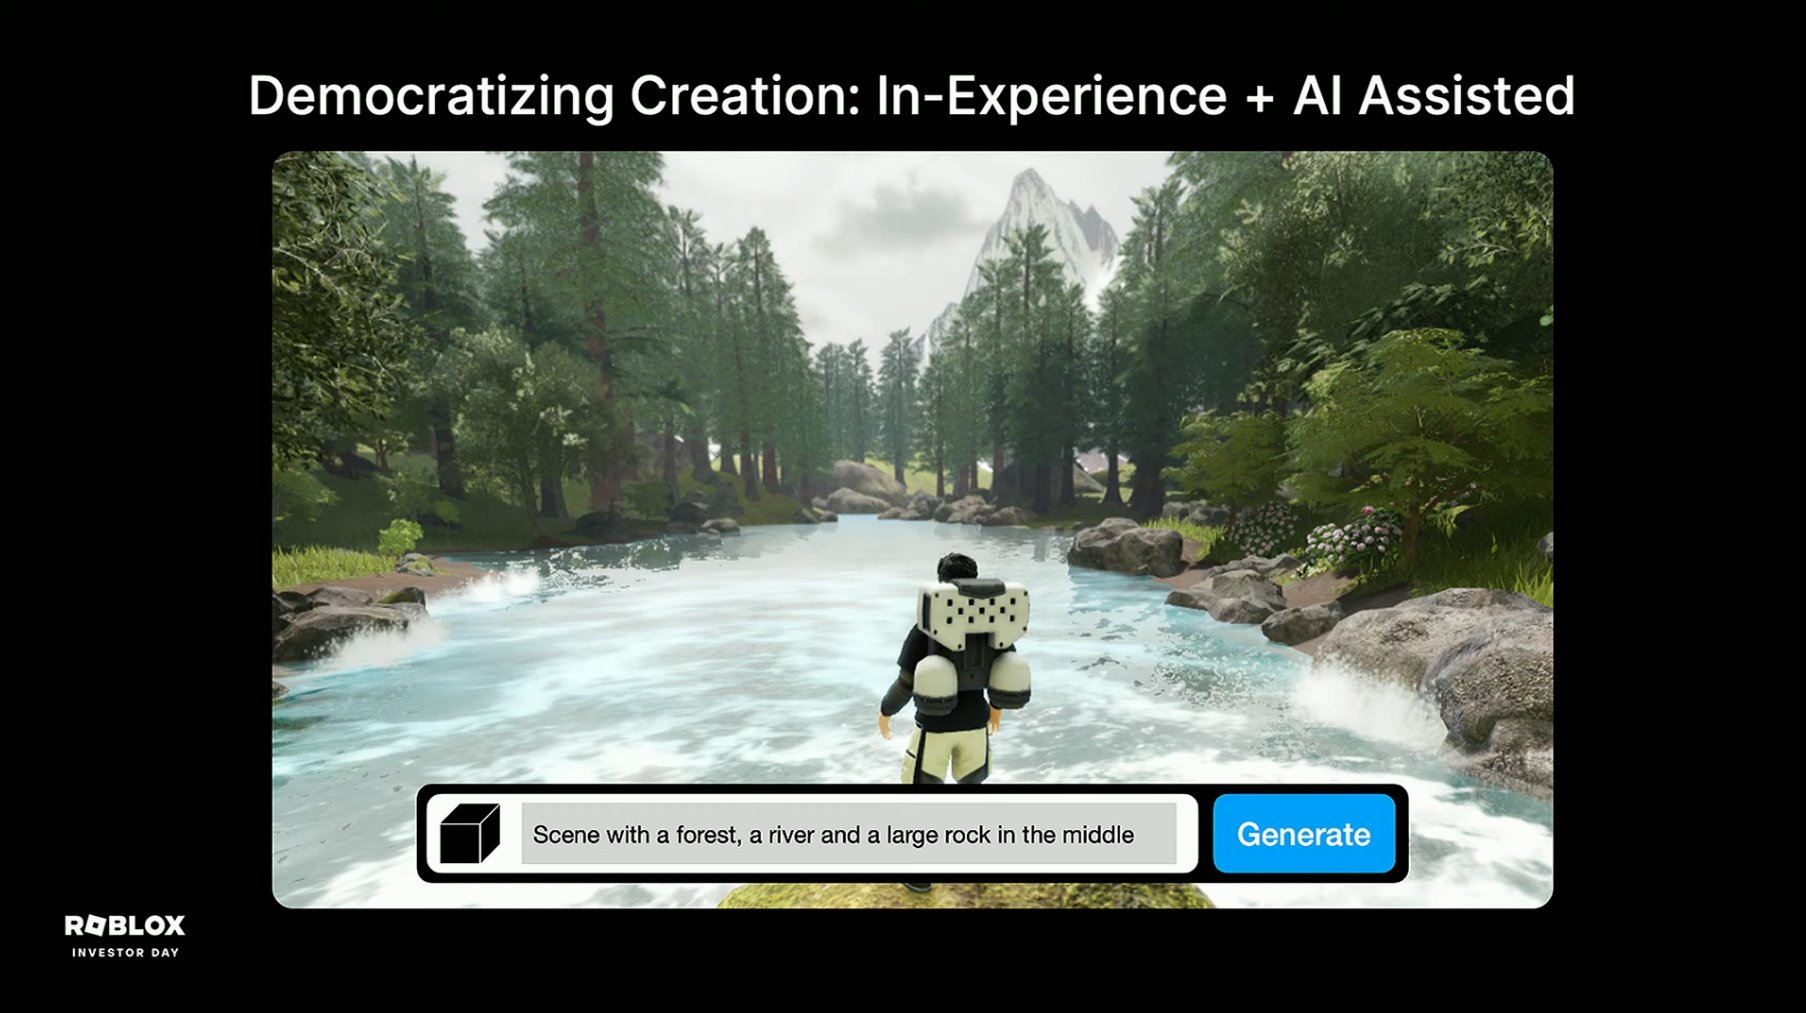 Bloxy News on X: JUST IN: Roblox Corporation (NYSE: $RBLX) has acquired  Sway, an app focused on motion effects and AI filters. We will be focused  on bringing our AI-driven creation framework